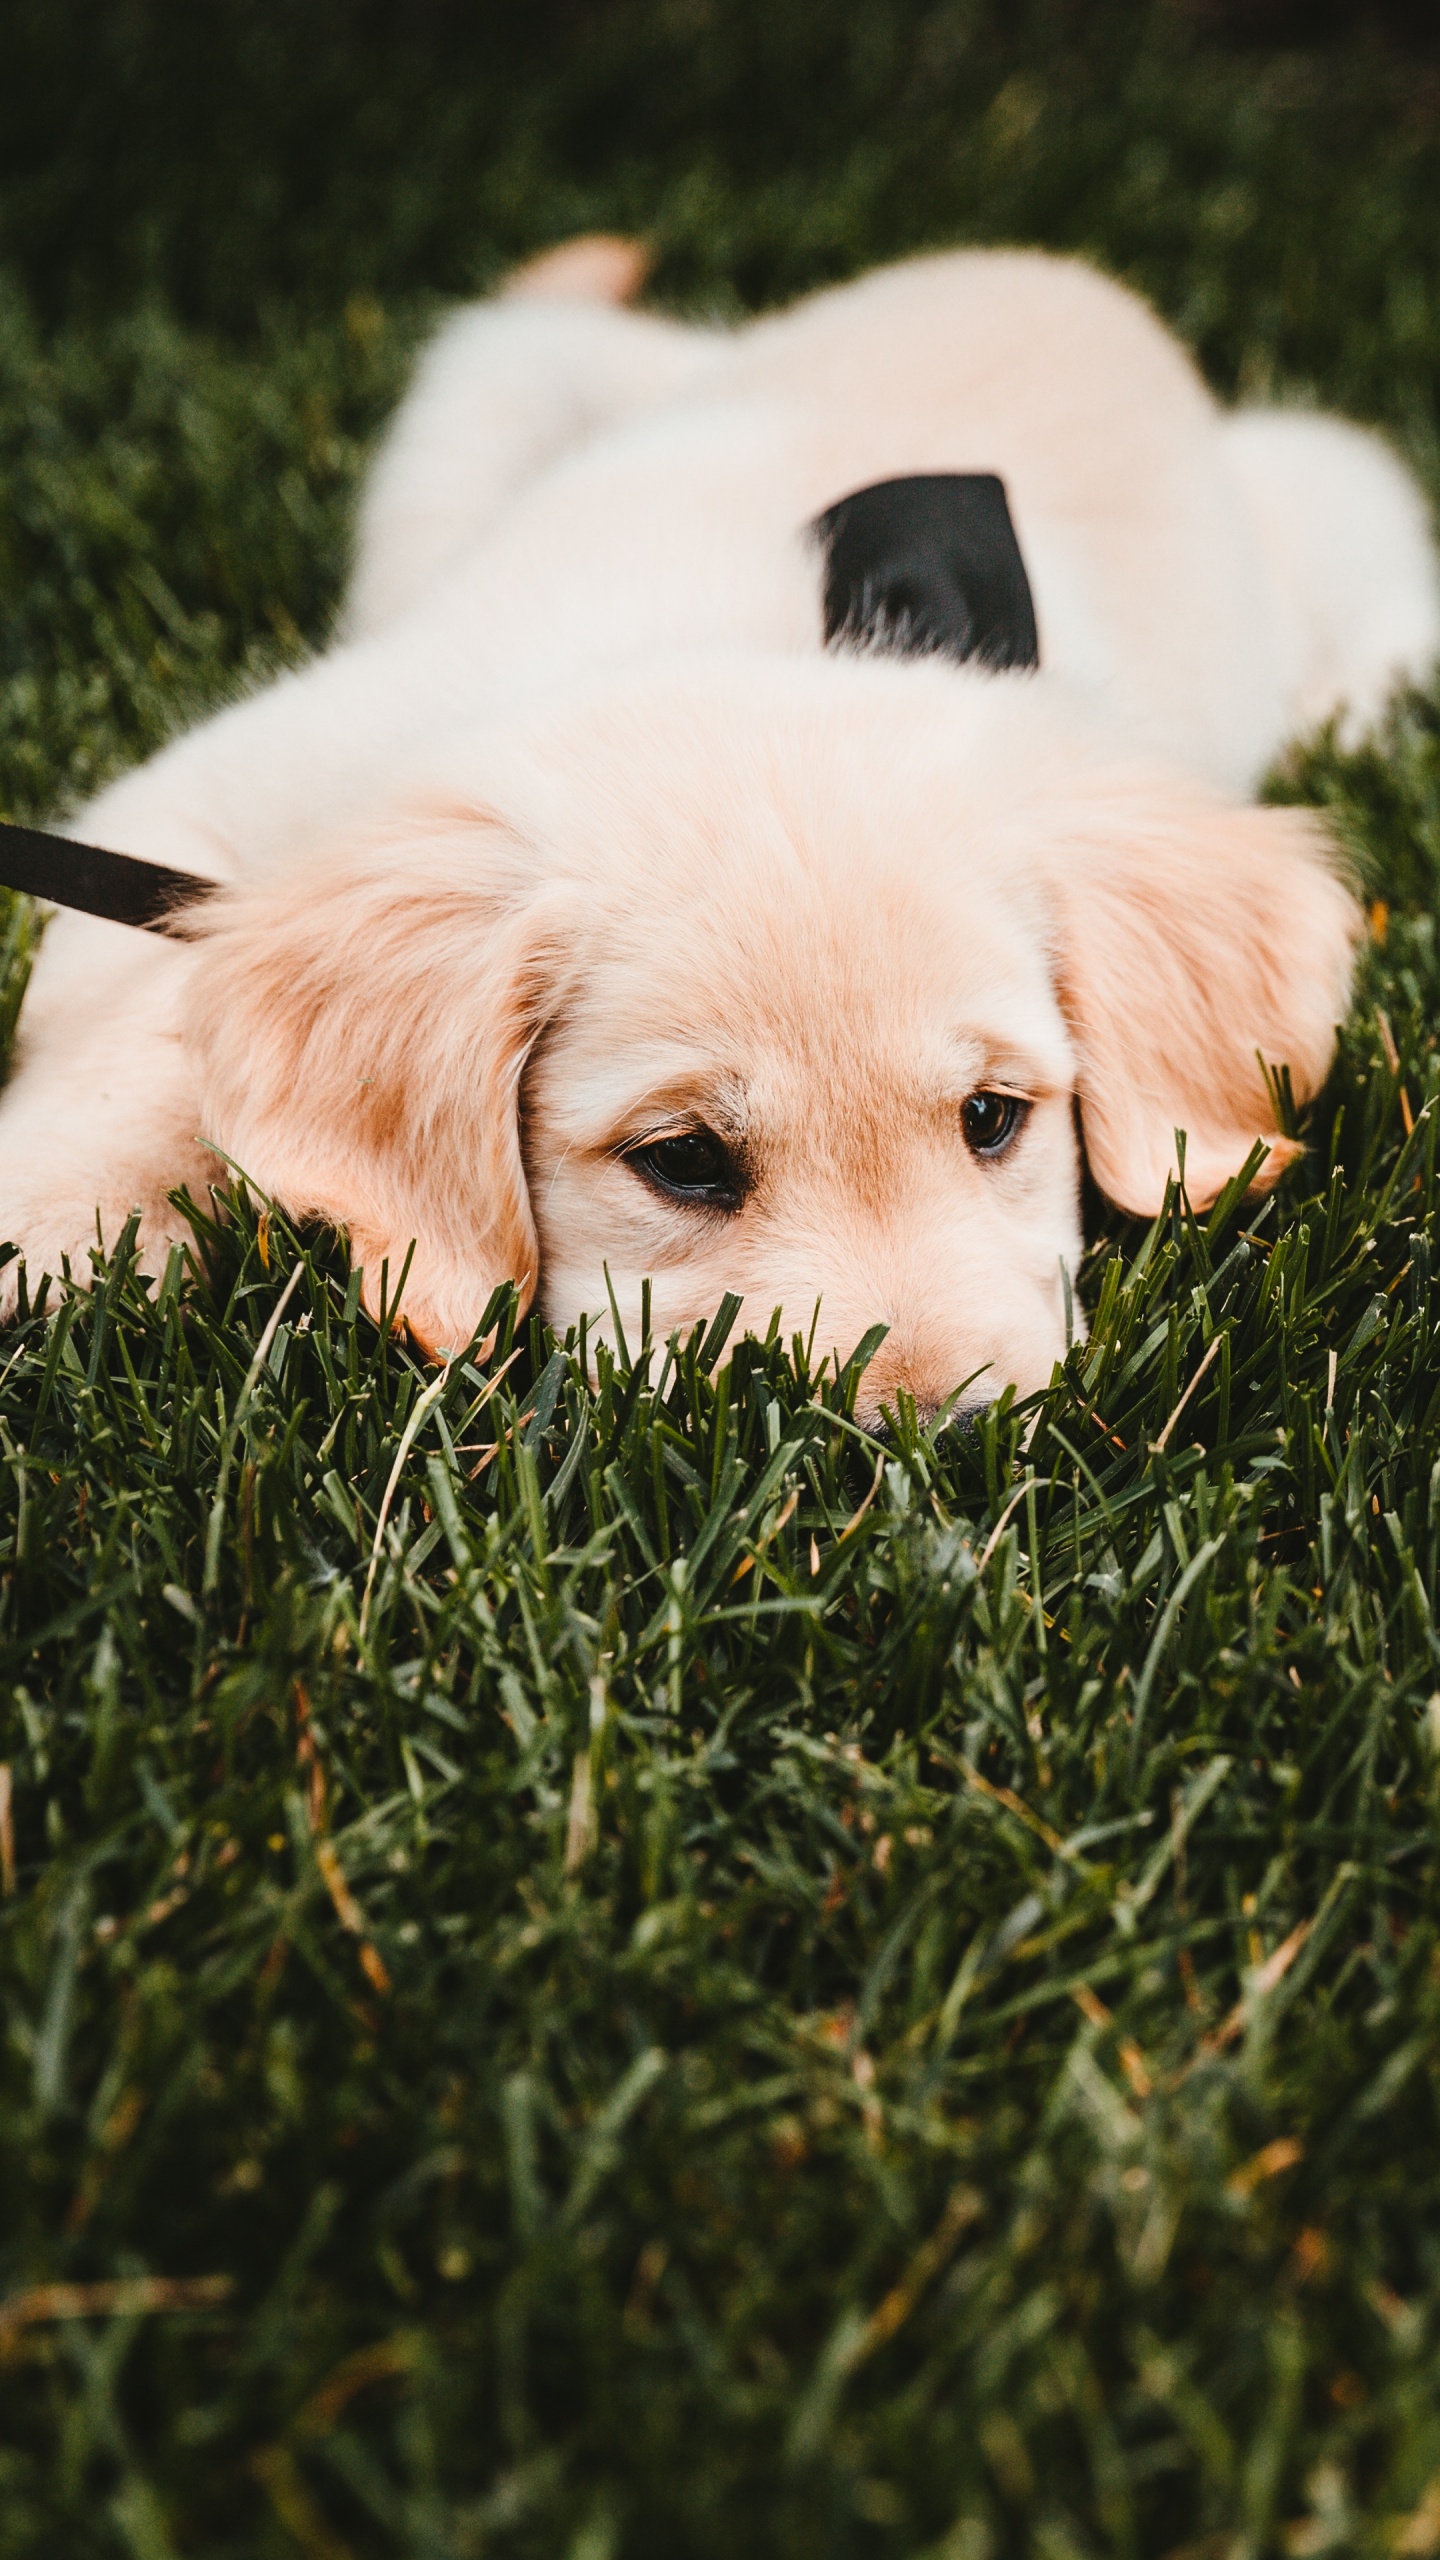 White Short Coated Dog Lying on Green Grass Field During Daytime. Wallpaper in 1440x2560 Resolution